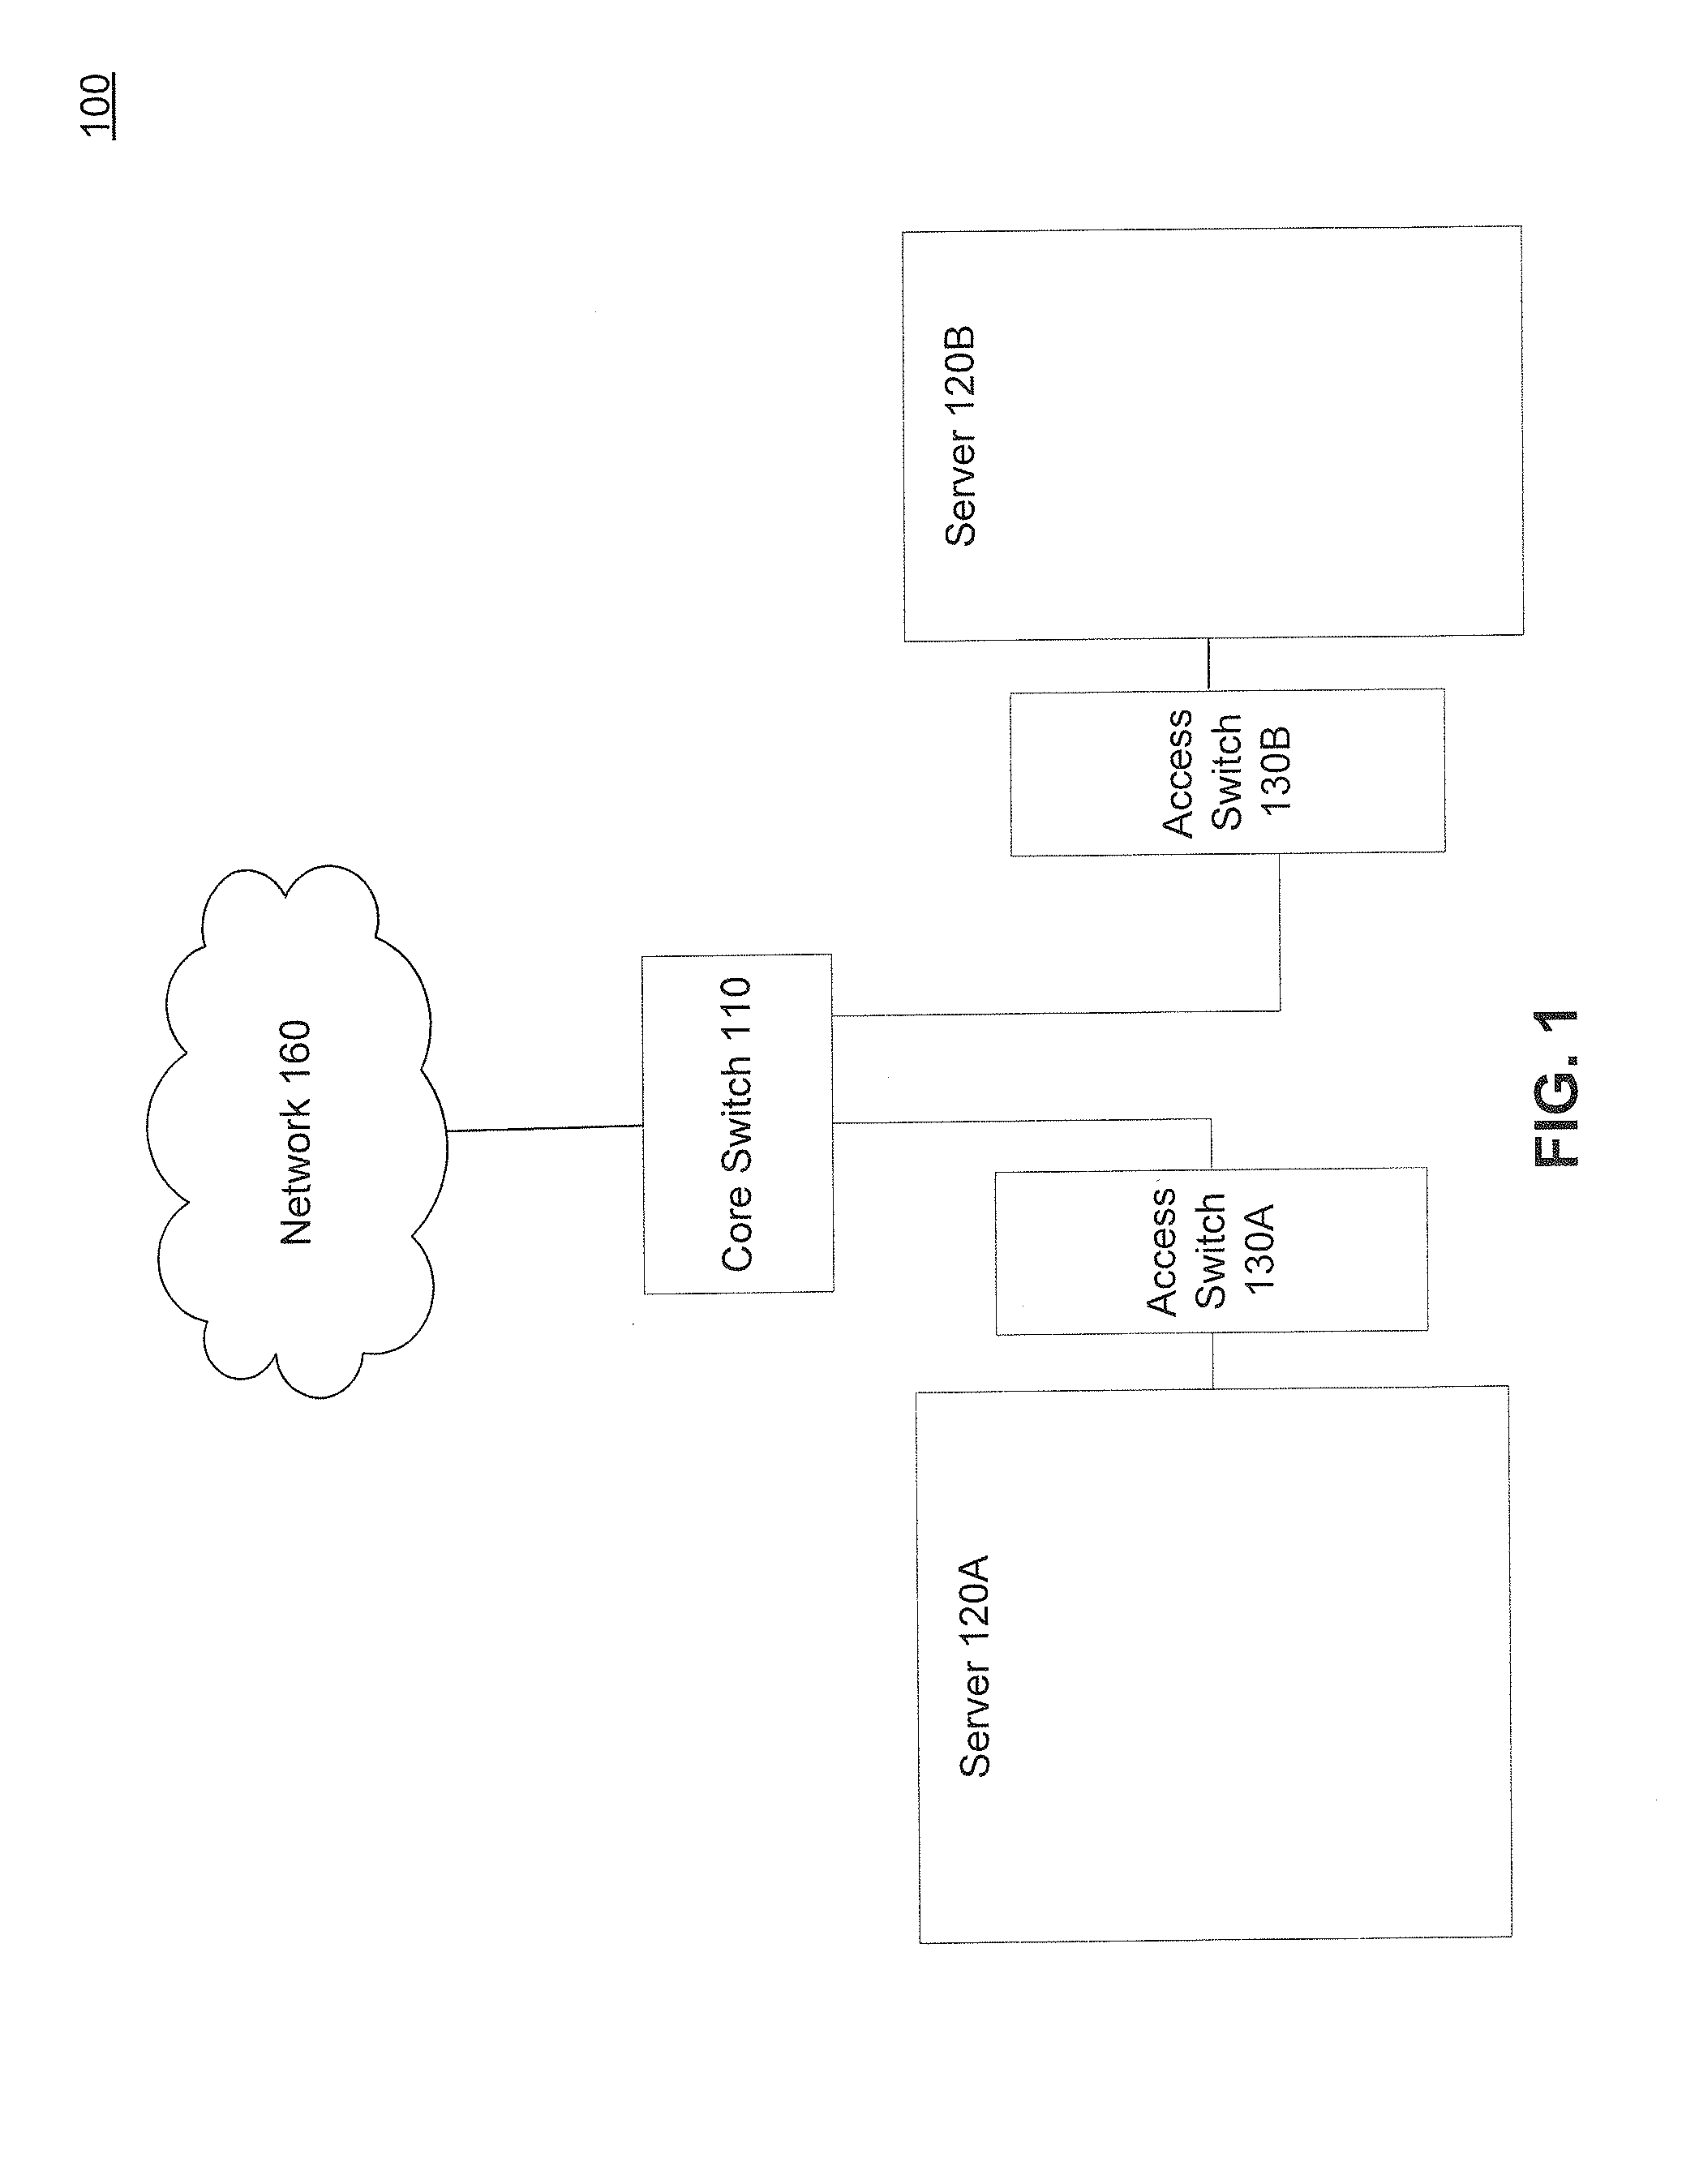 Distributed Switch Domain of Heterogeneous Components